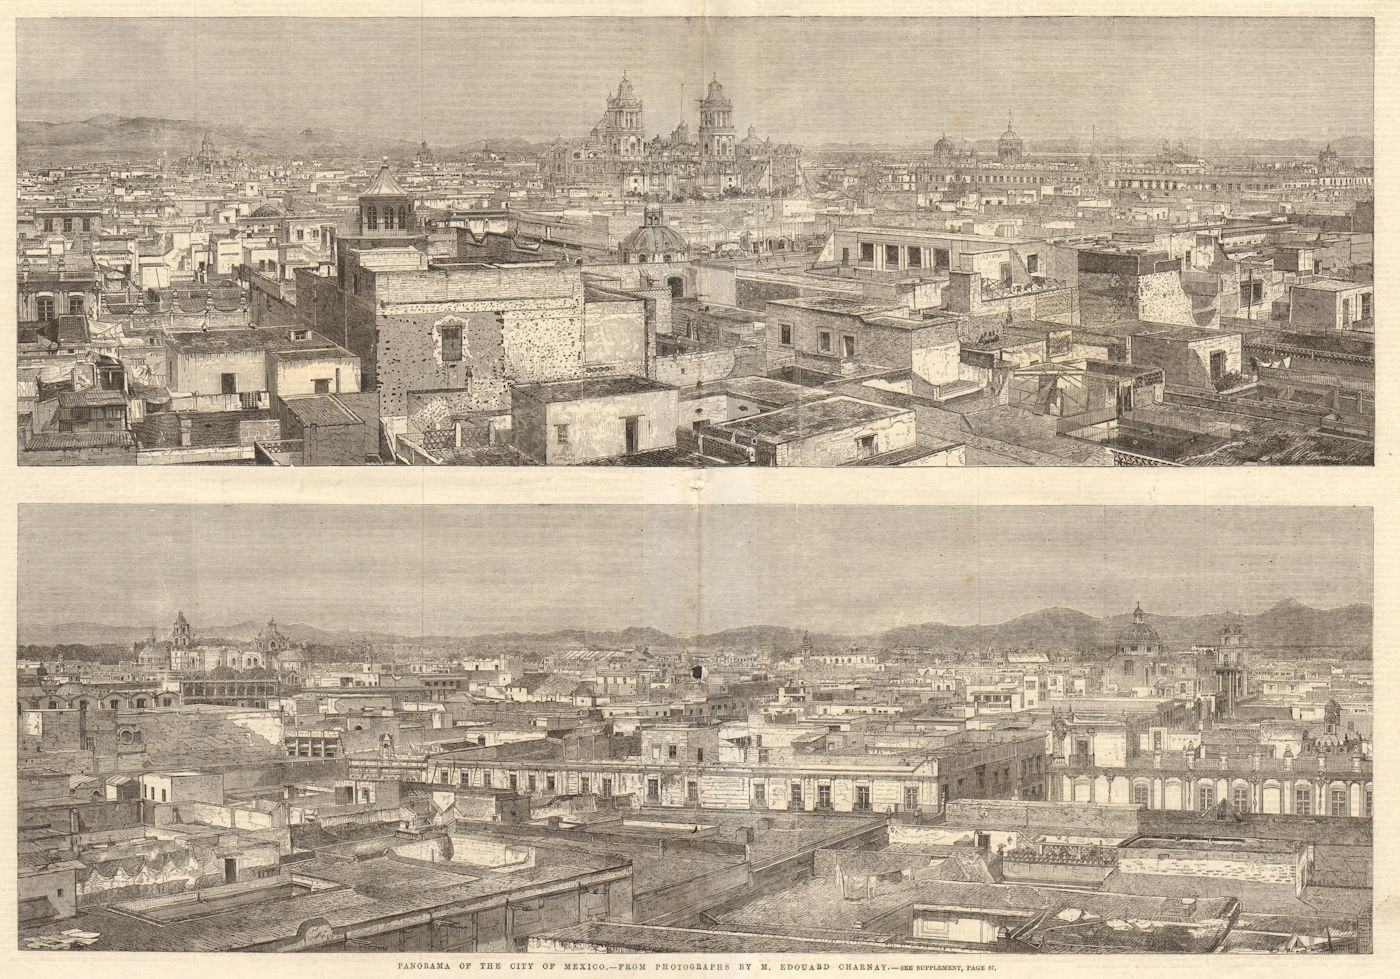 Associate Product Panorama of the city of Mexico - from photographs by M. Edouard Charnay 1863